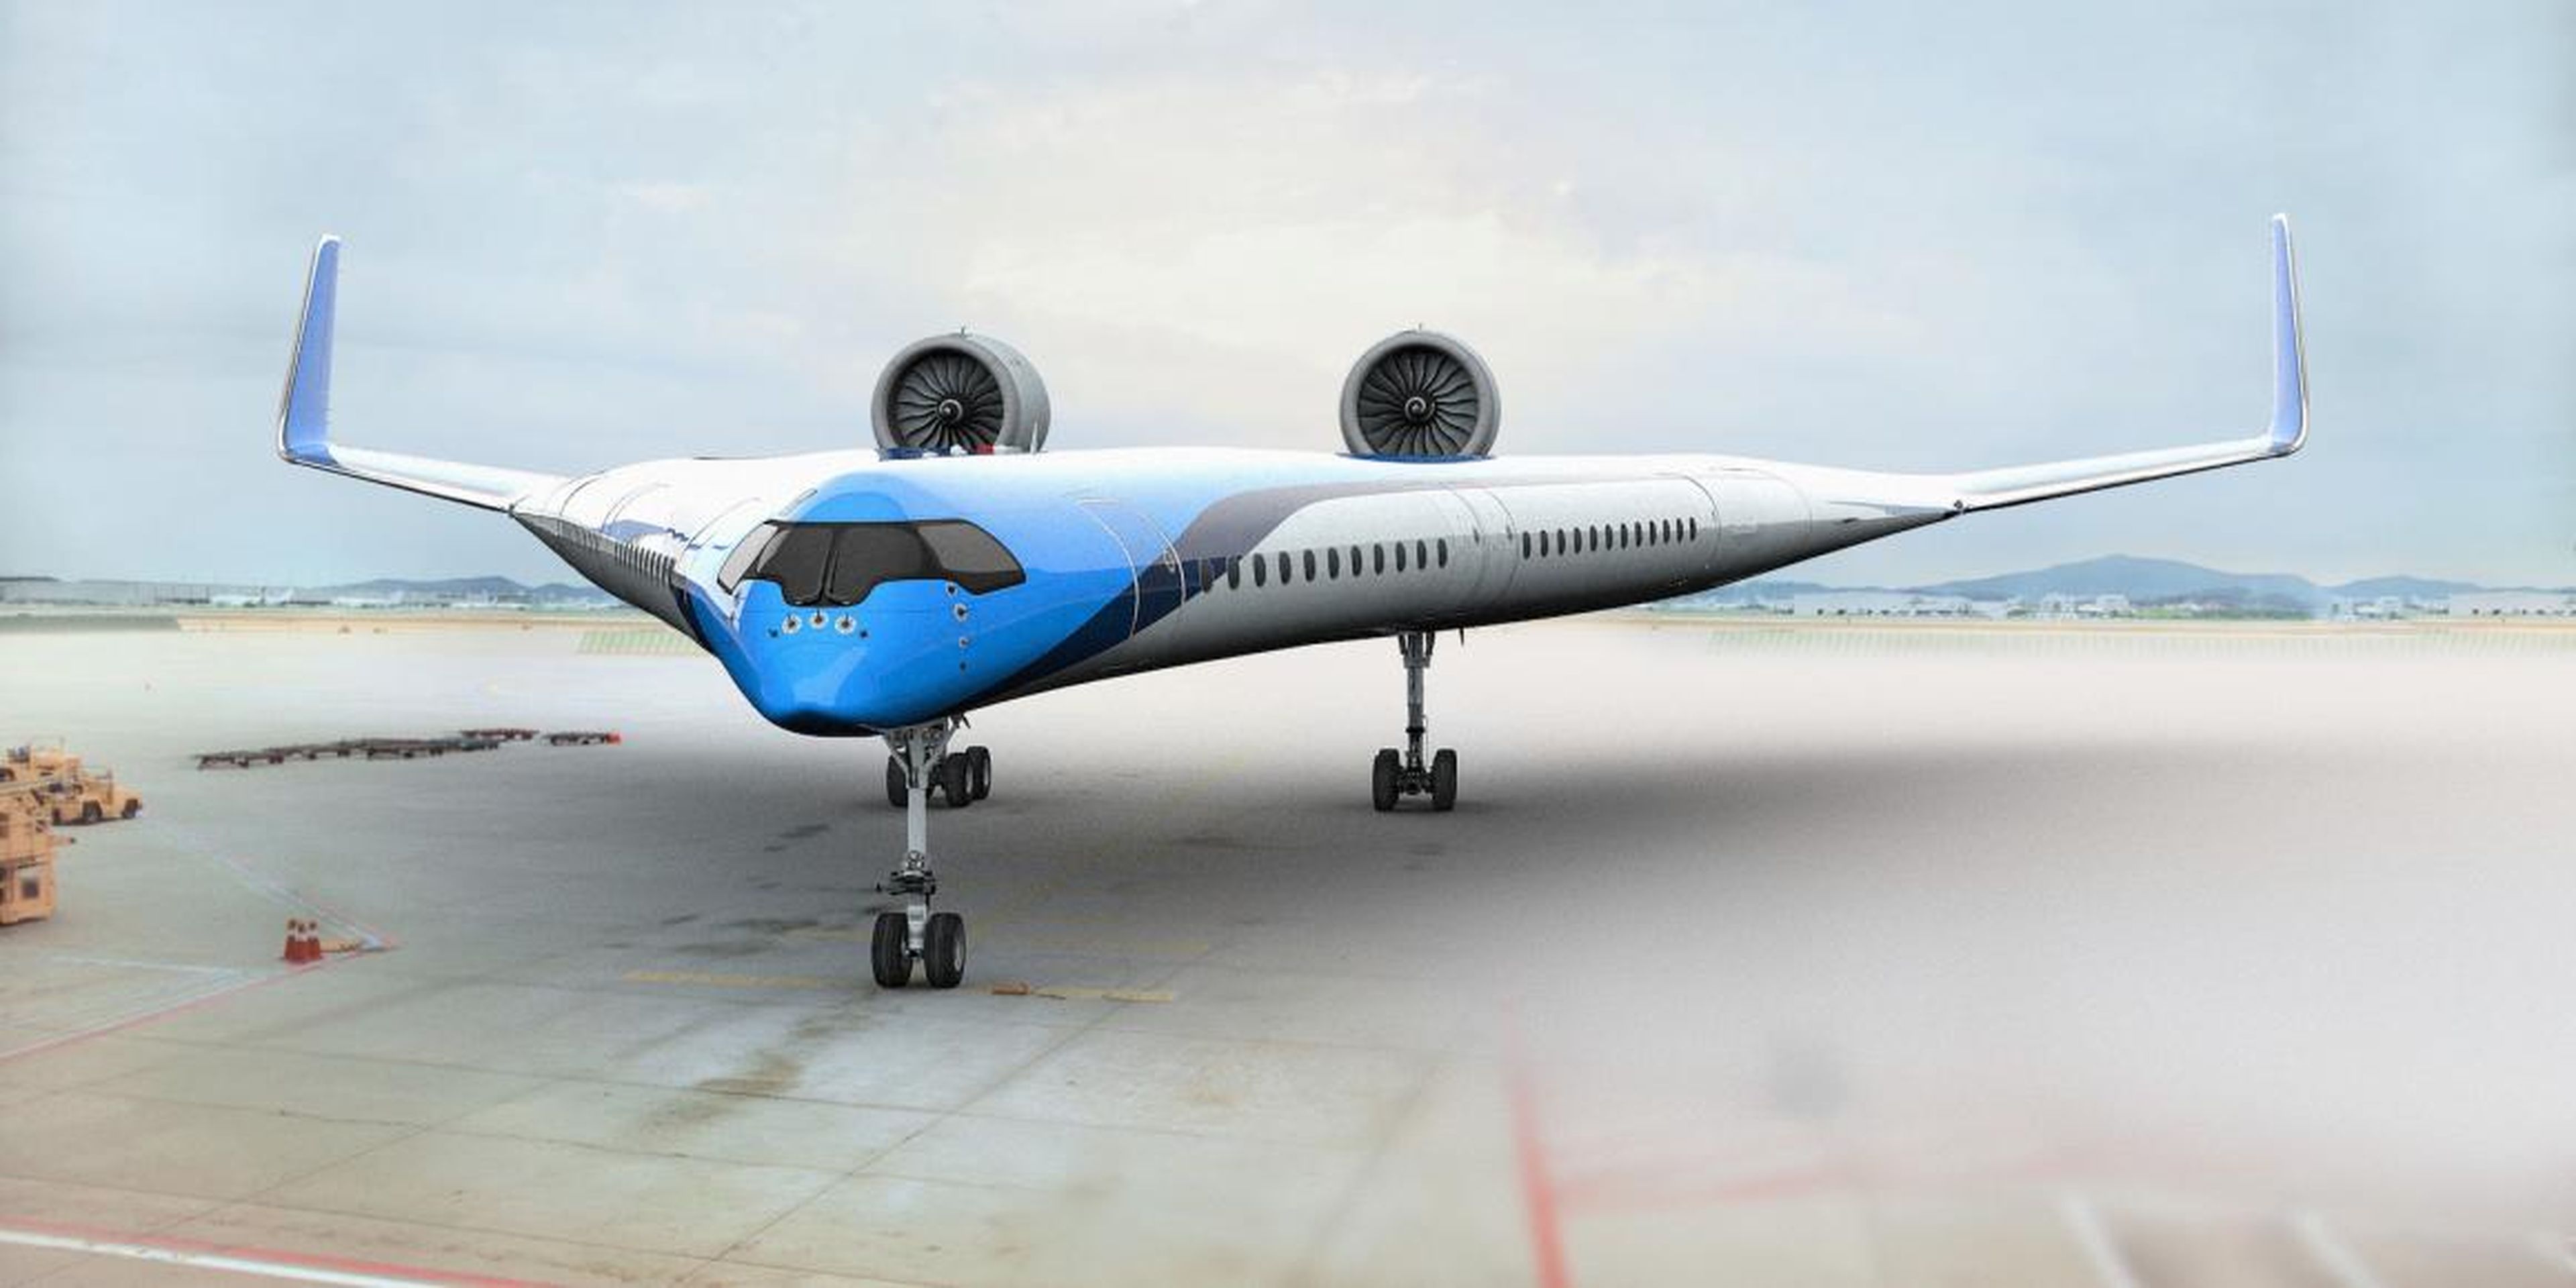 The "Flying V" is meant to be more fuel-efficient thanks to its futuristic design.